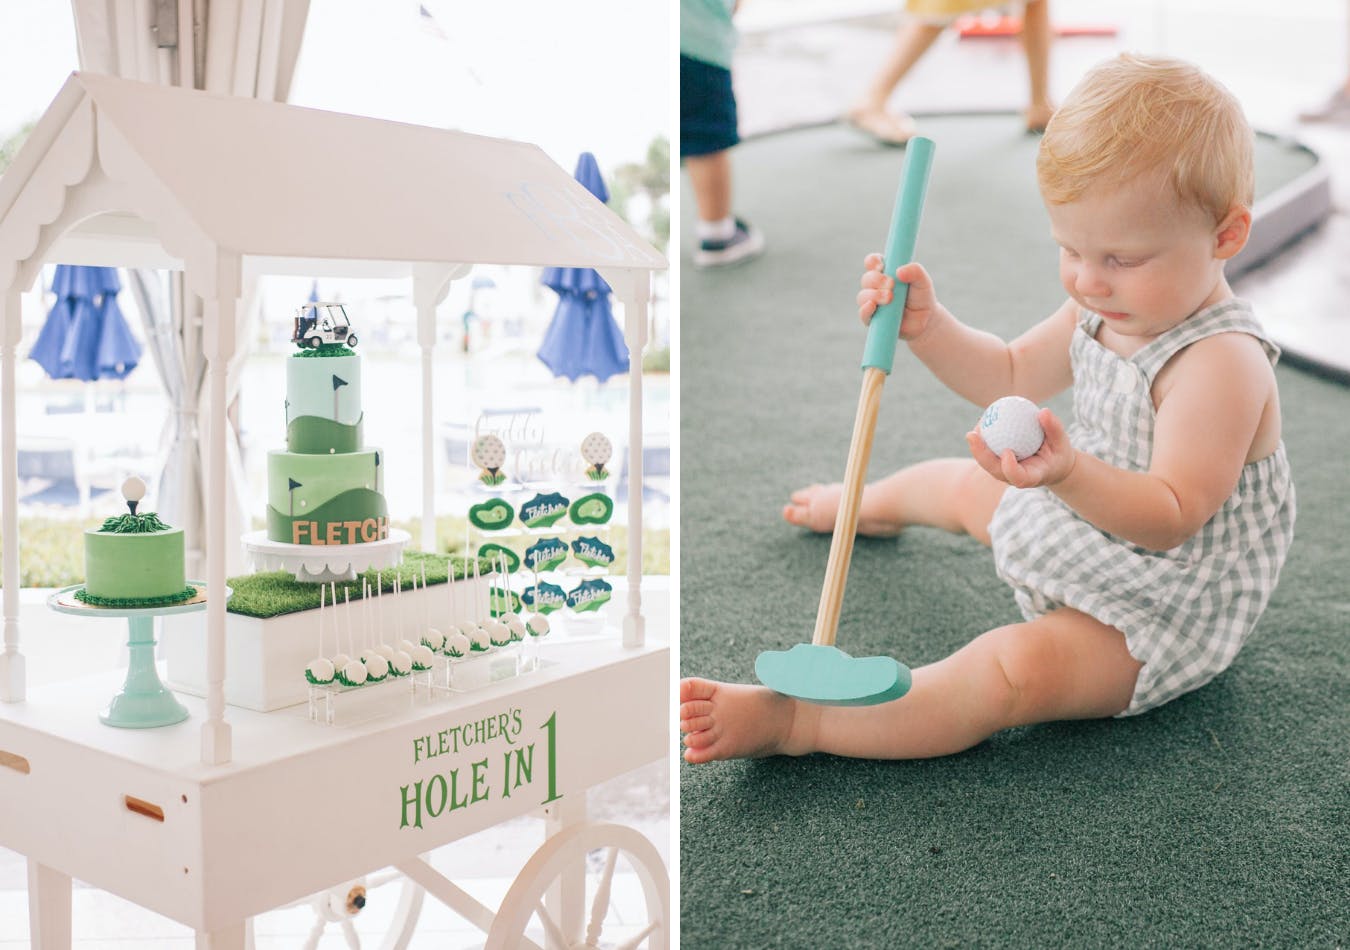 Hole in One-themed birthday party with golf-themed cake and mini golfing activity | PartySlate